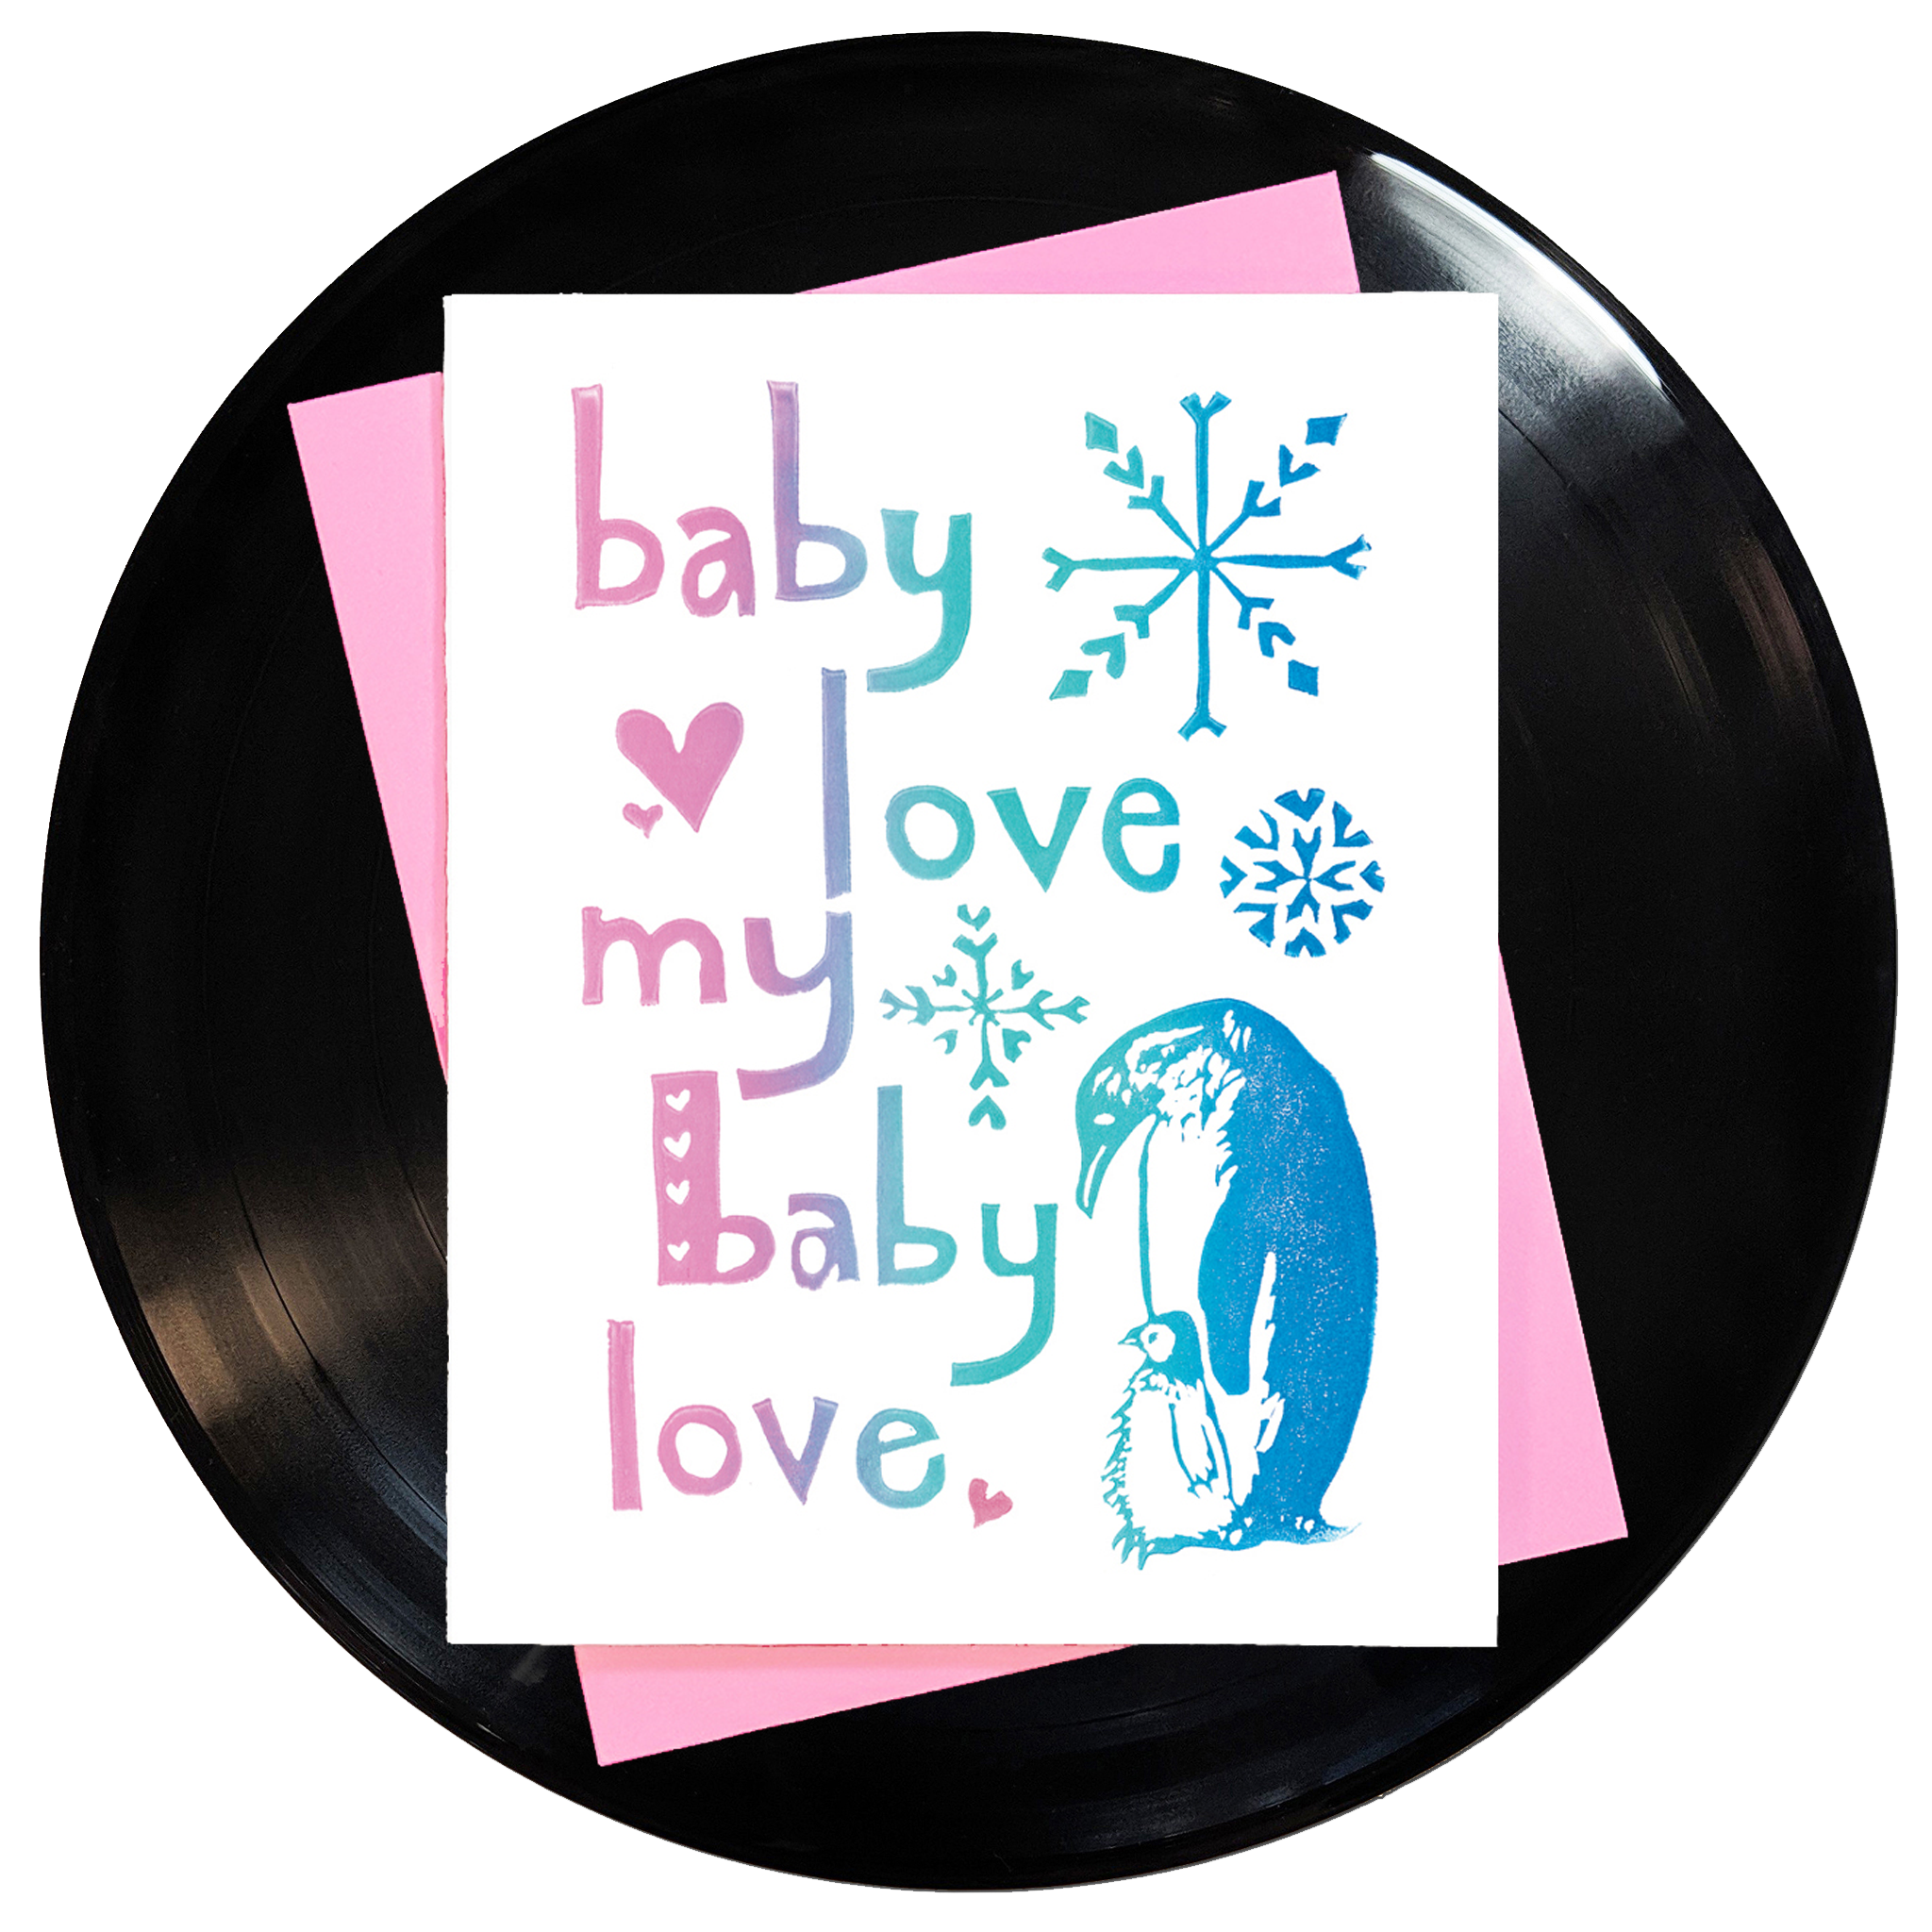 Baby Love My Baby Love Greeting Card 6-Pack Inspired By Music